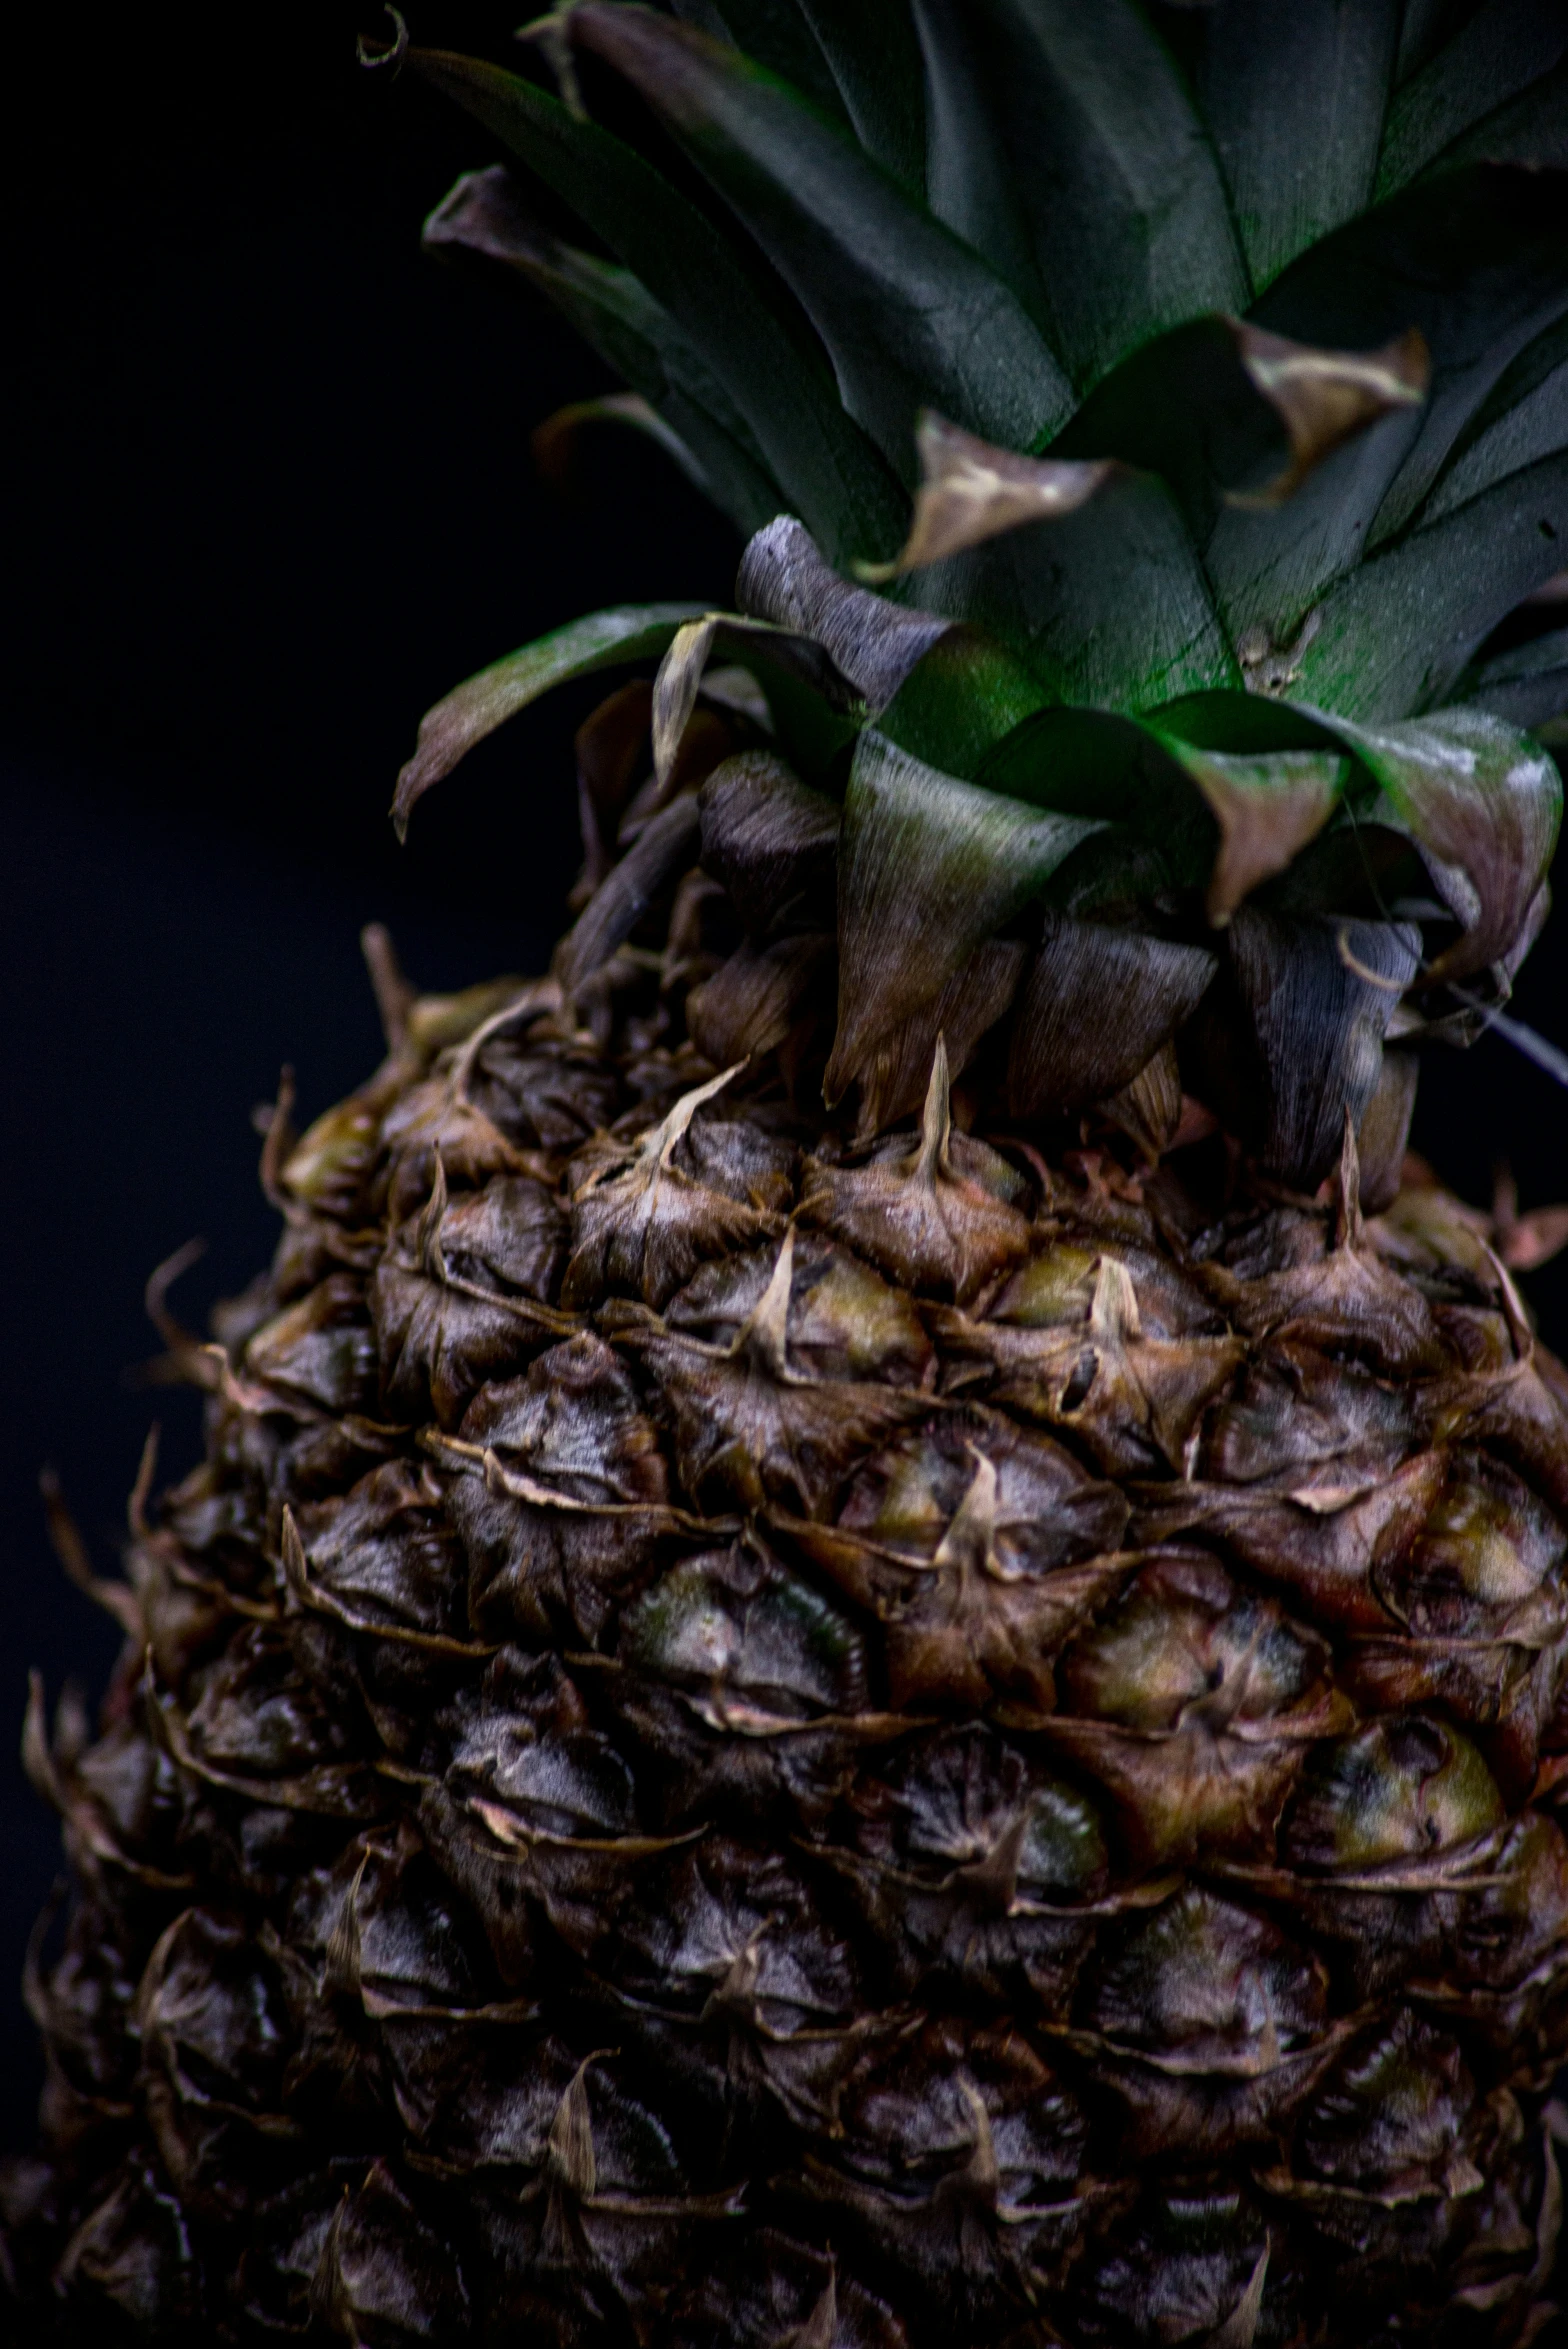 a close up view of the inside of a pineapple